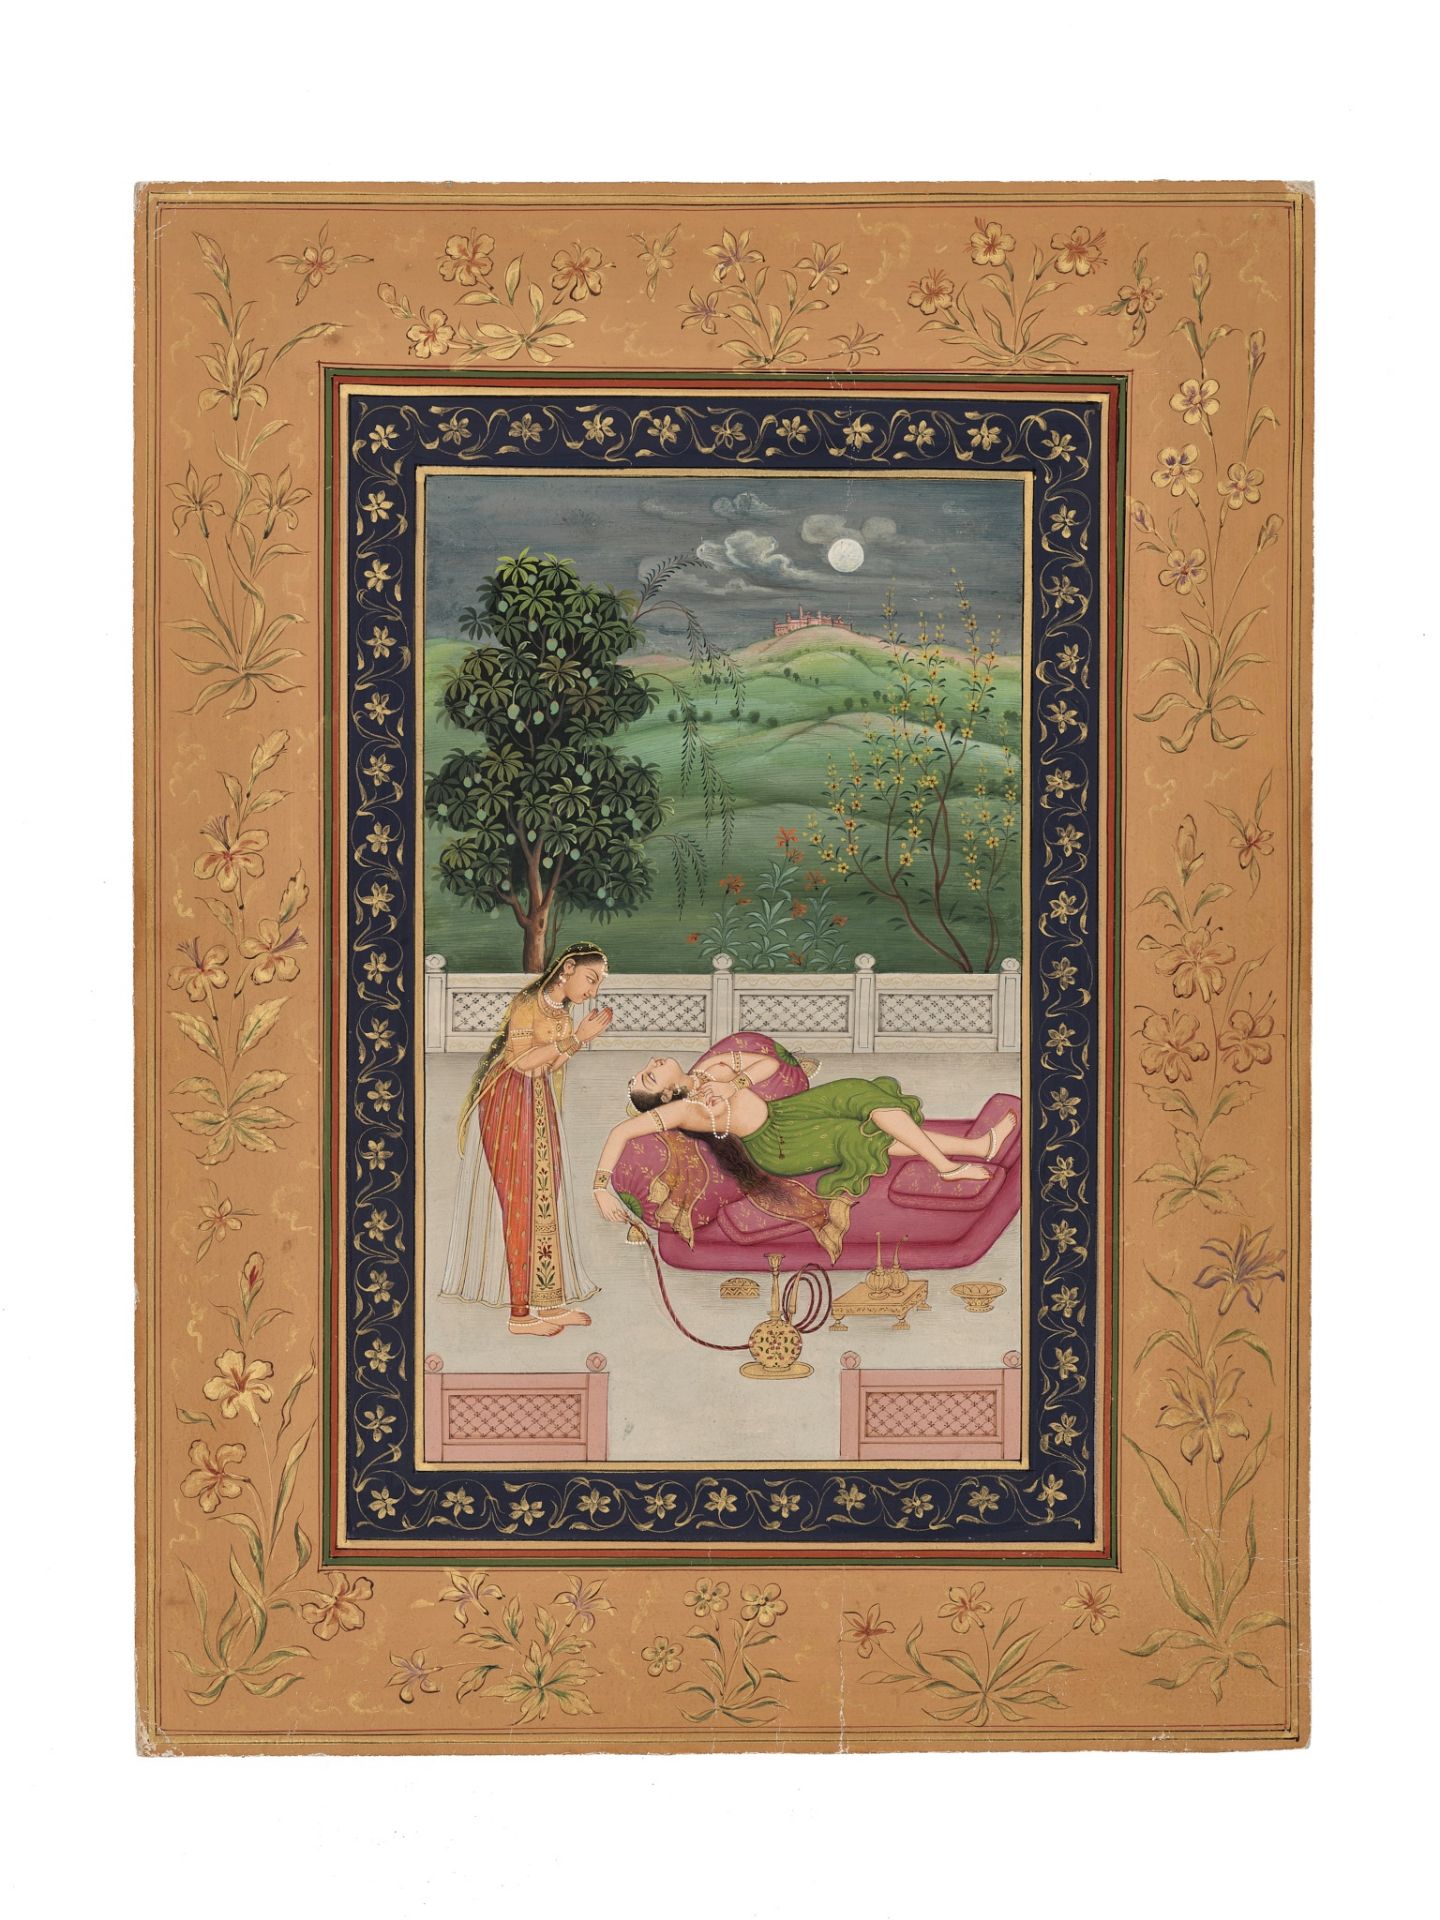 AN INDIAN MINIATURE PAINTING OF A LADY SMOKING A HOOKAH - Image 7 of 8